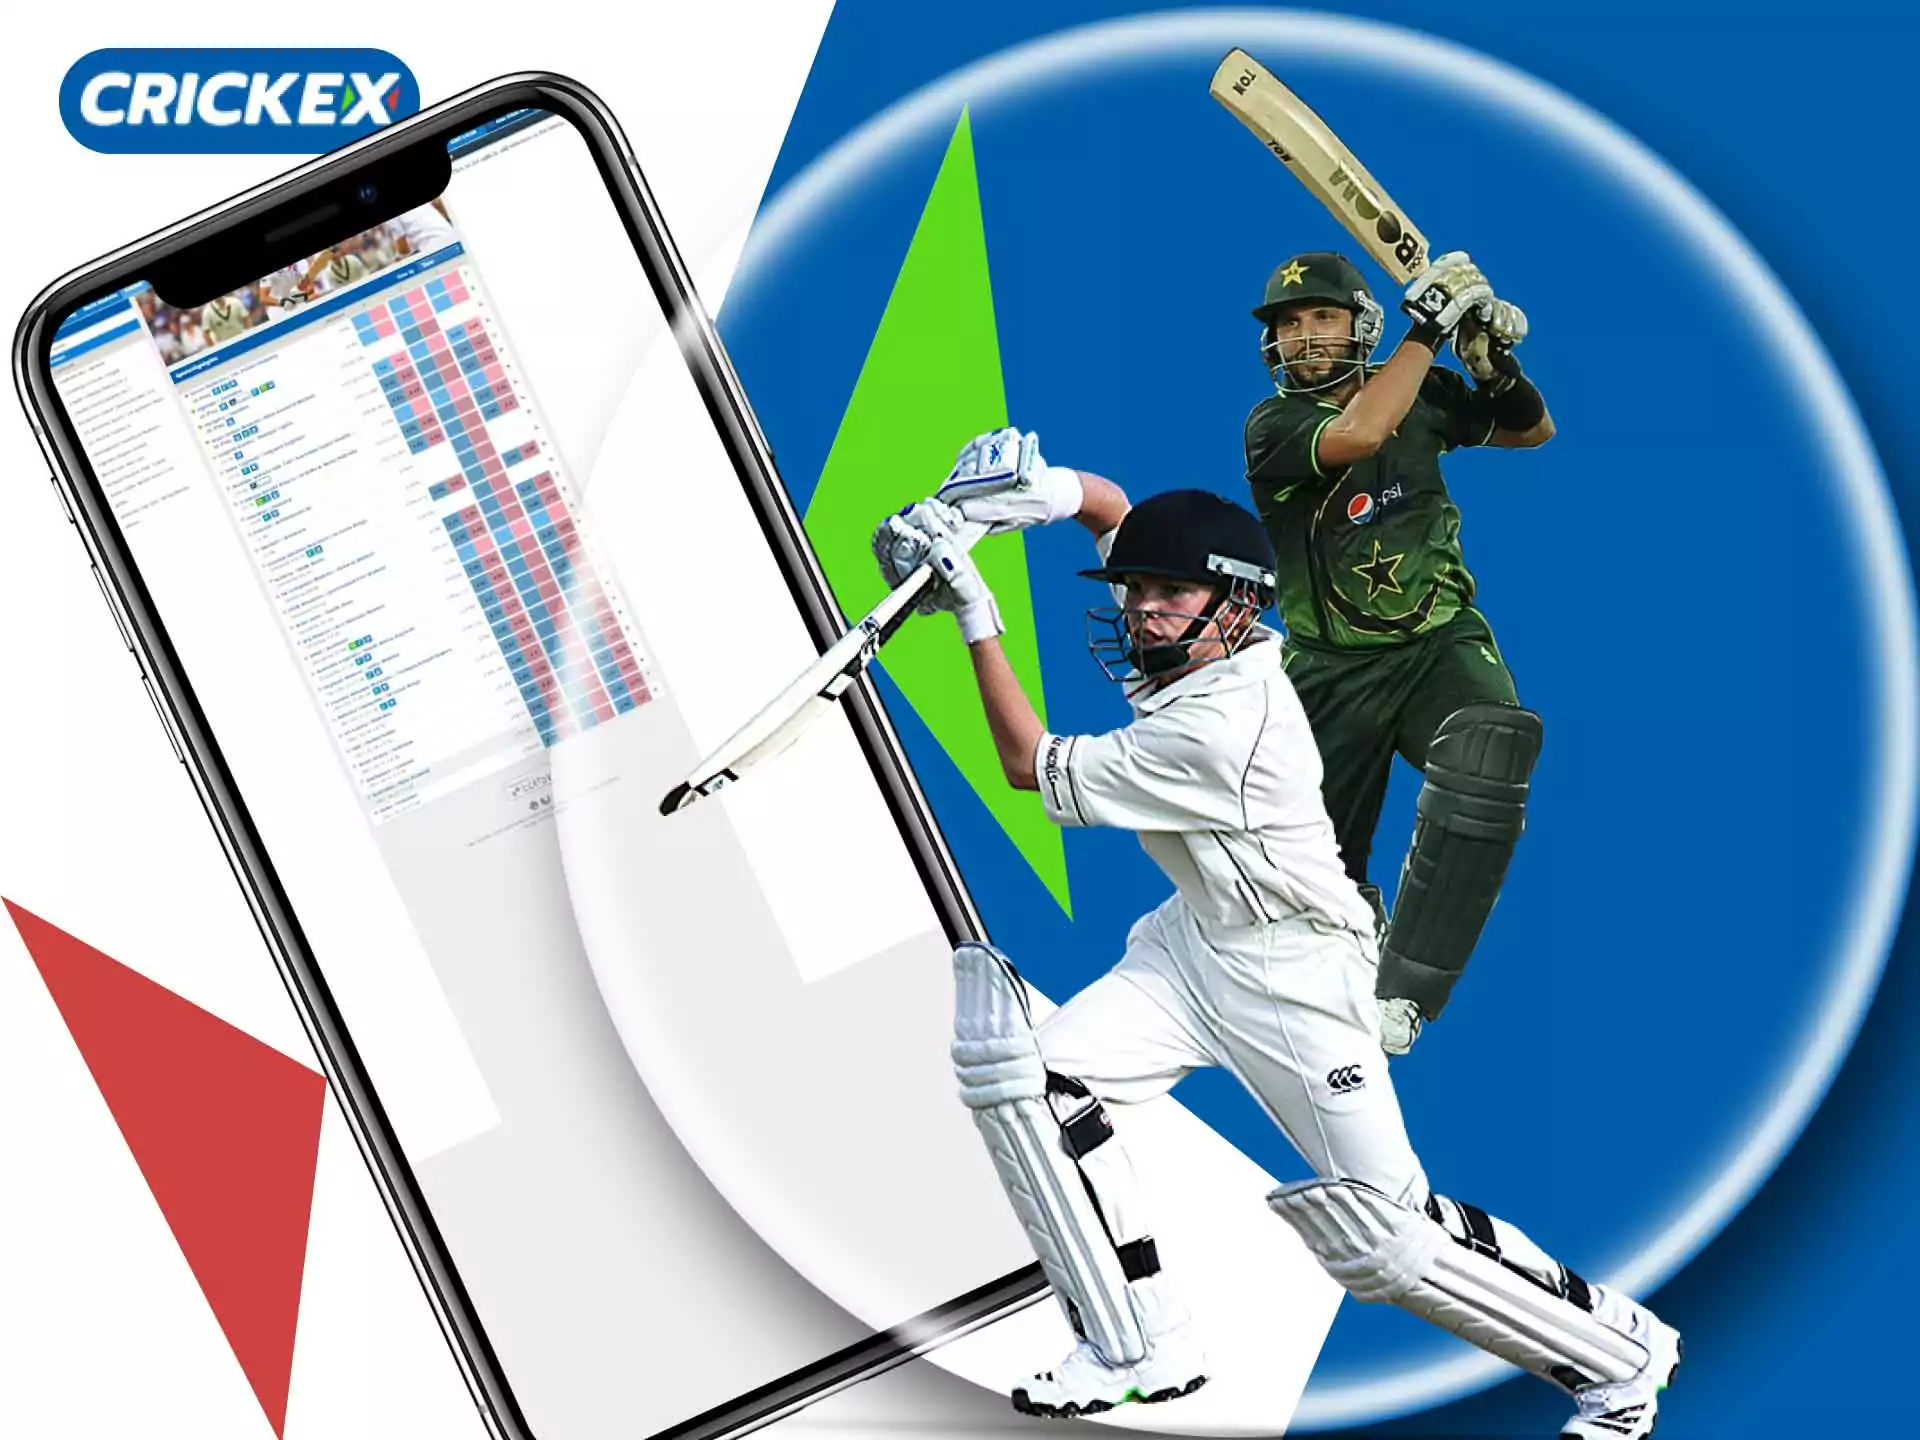 You can place bets on cricket, football, basketball and othe sports in the Crickex app.